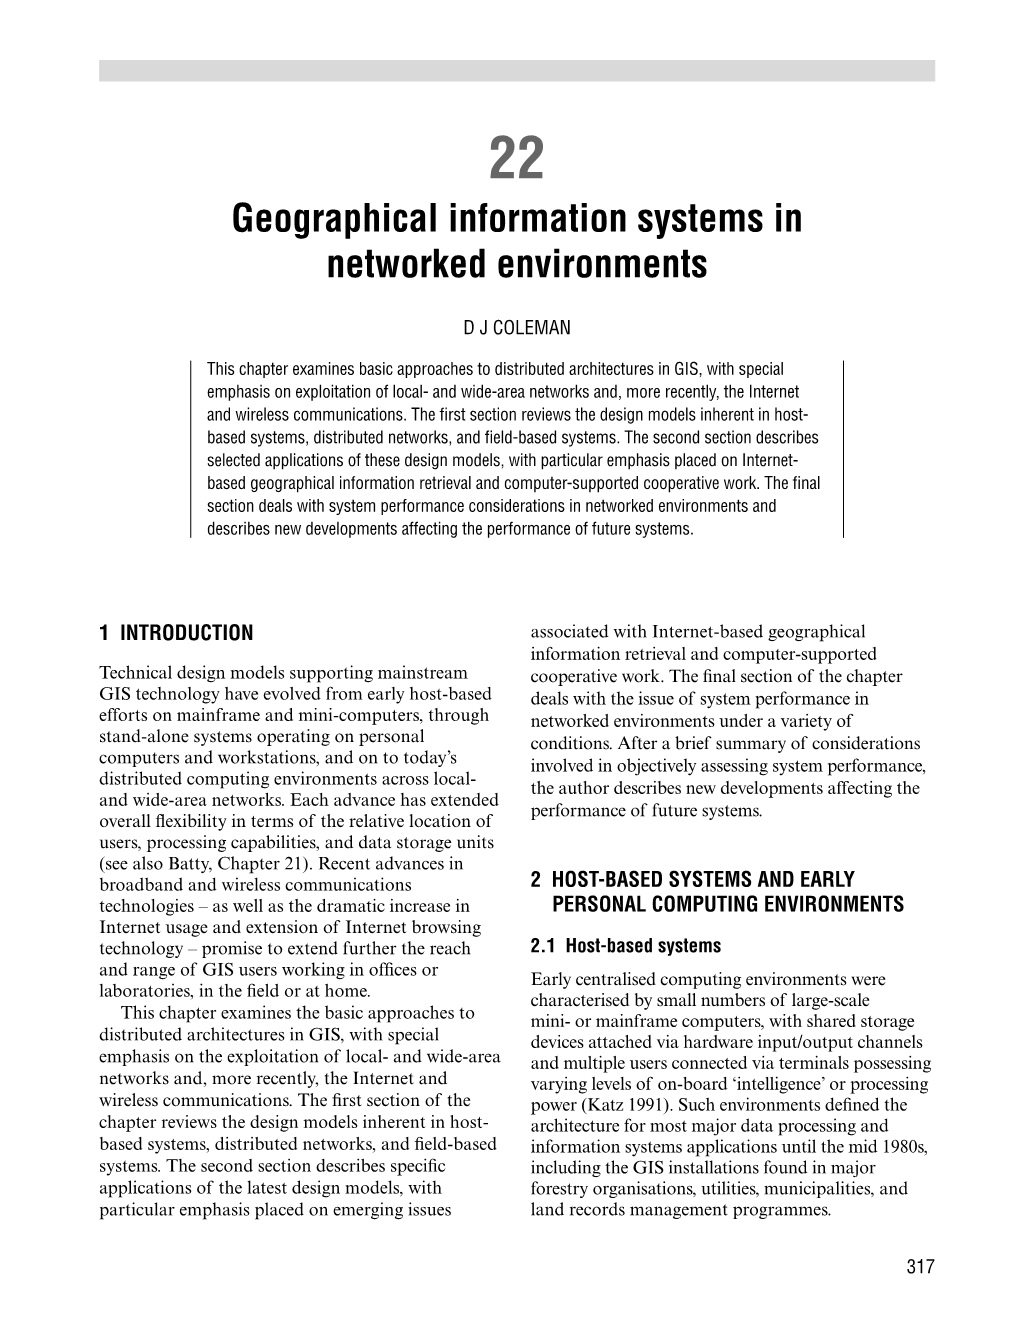 Geographical Information Systems in Networked Environments